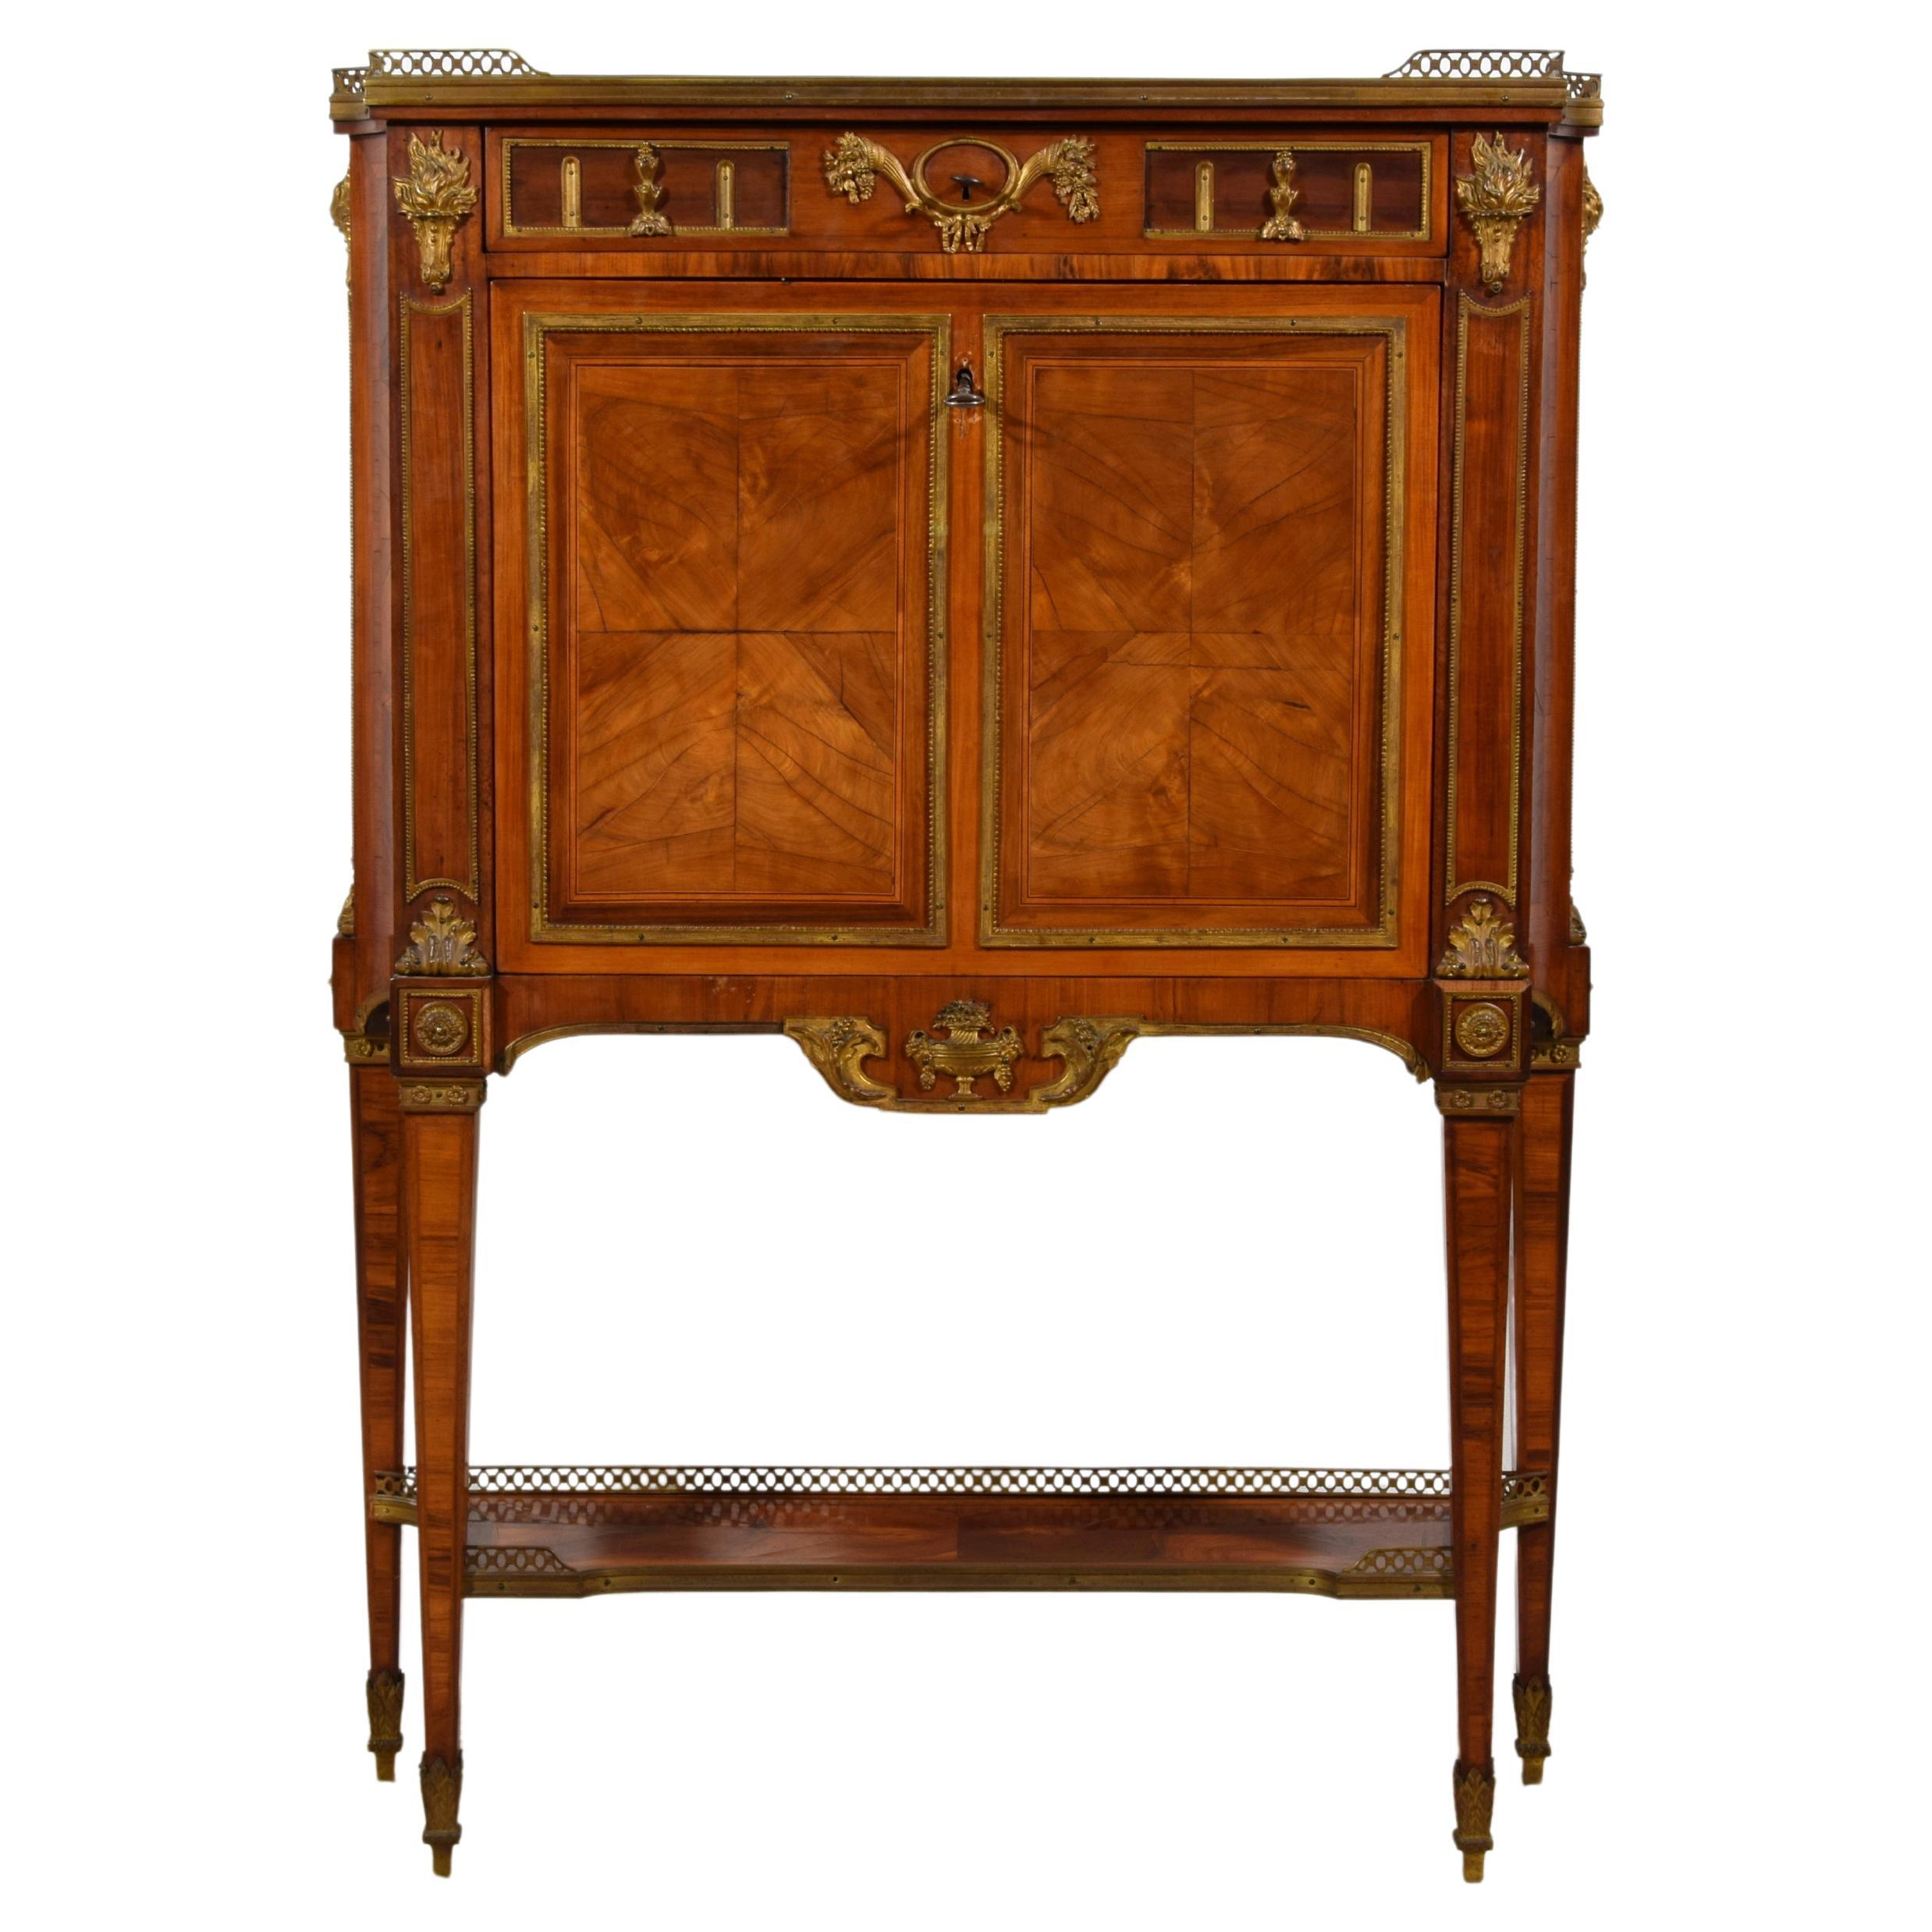 19th Century, French Louis XVI Style Wood Secretaire Sideboard 